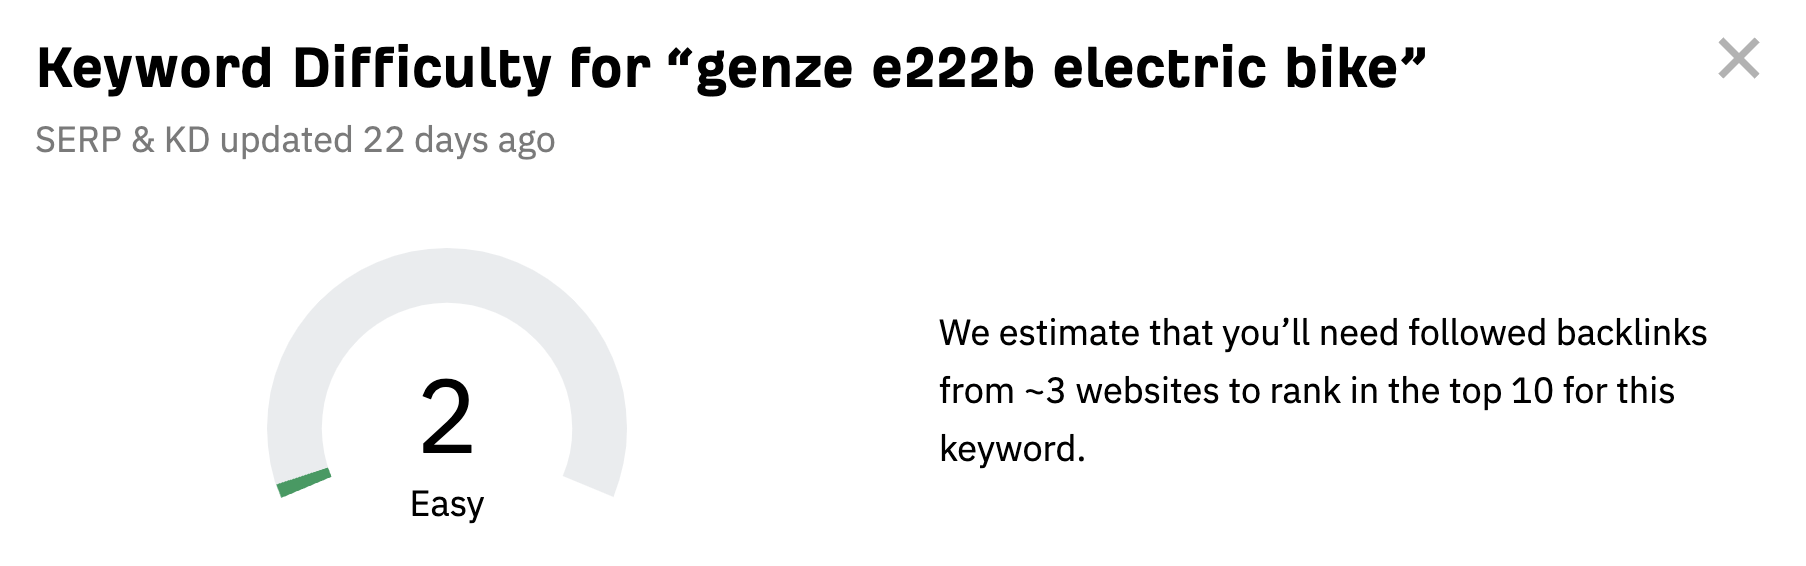 The Ahrefs Keyword Difficulty (KD) score for "genze e222b electric bike" is low 